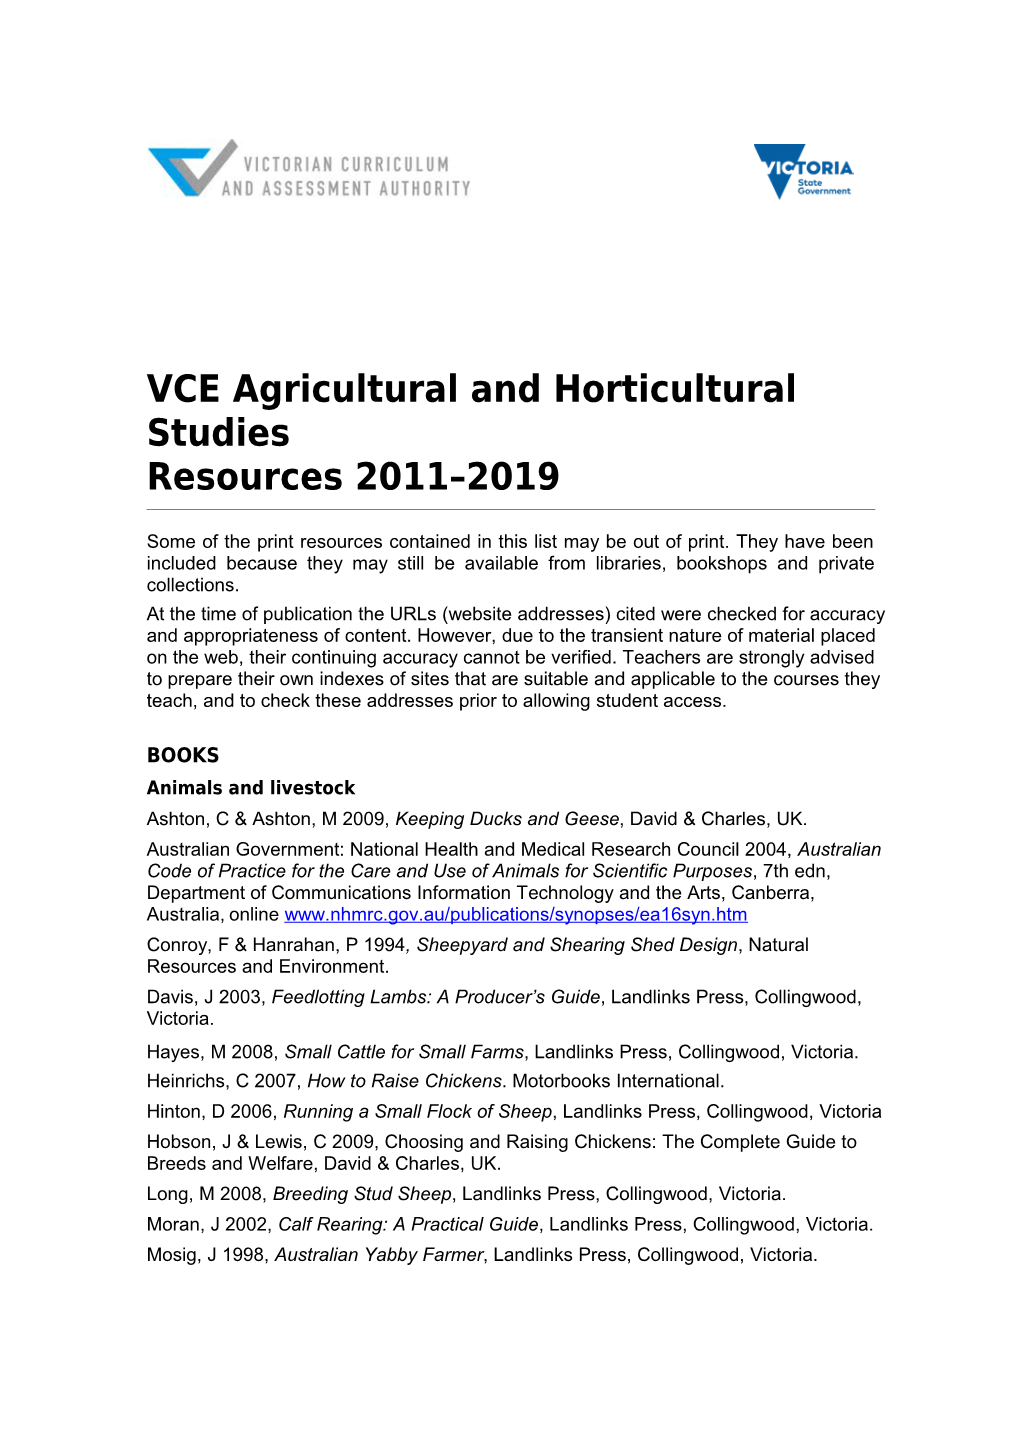 VCE Agricultural and Horticultural Studies Resources 2011-2016